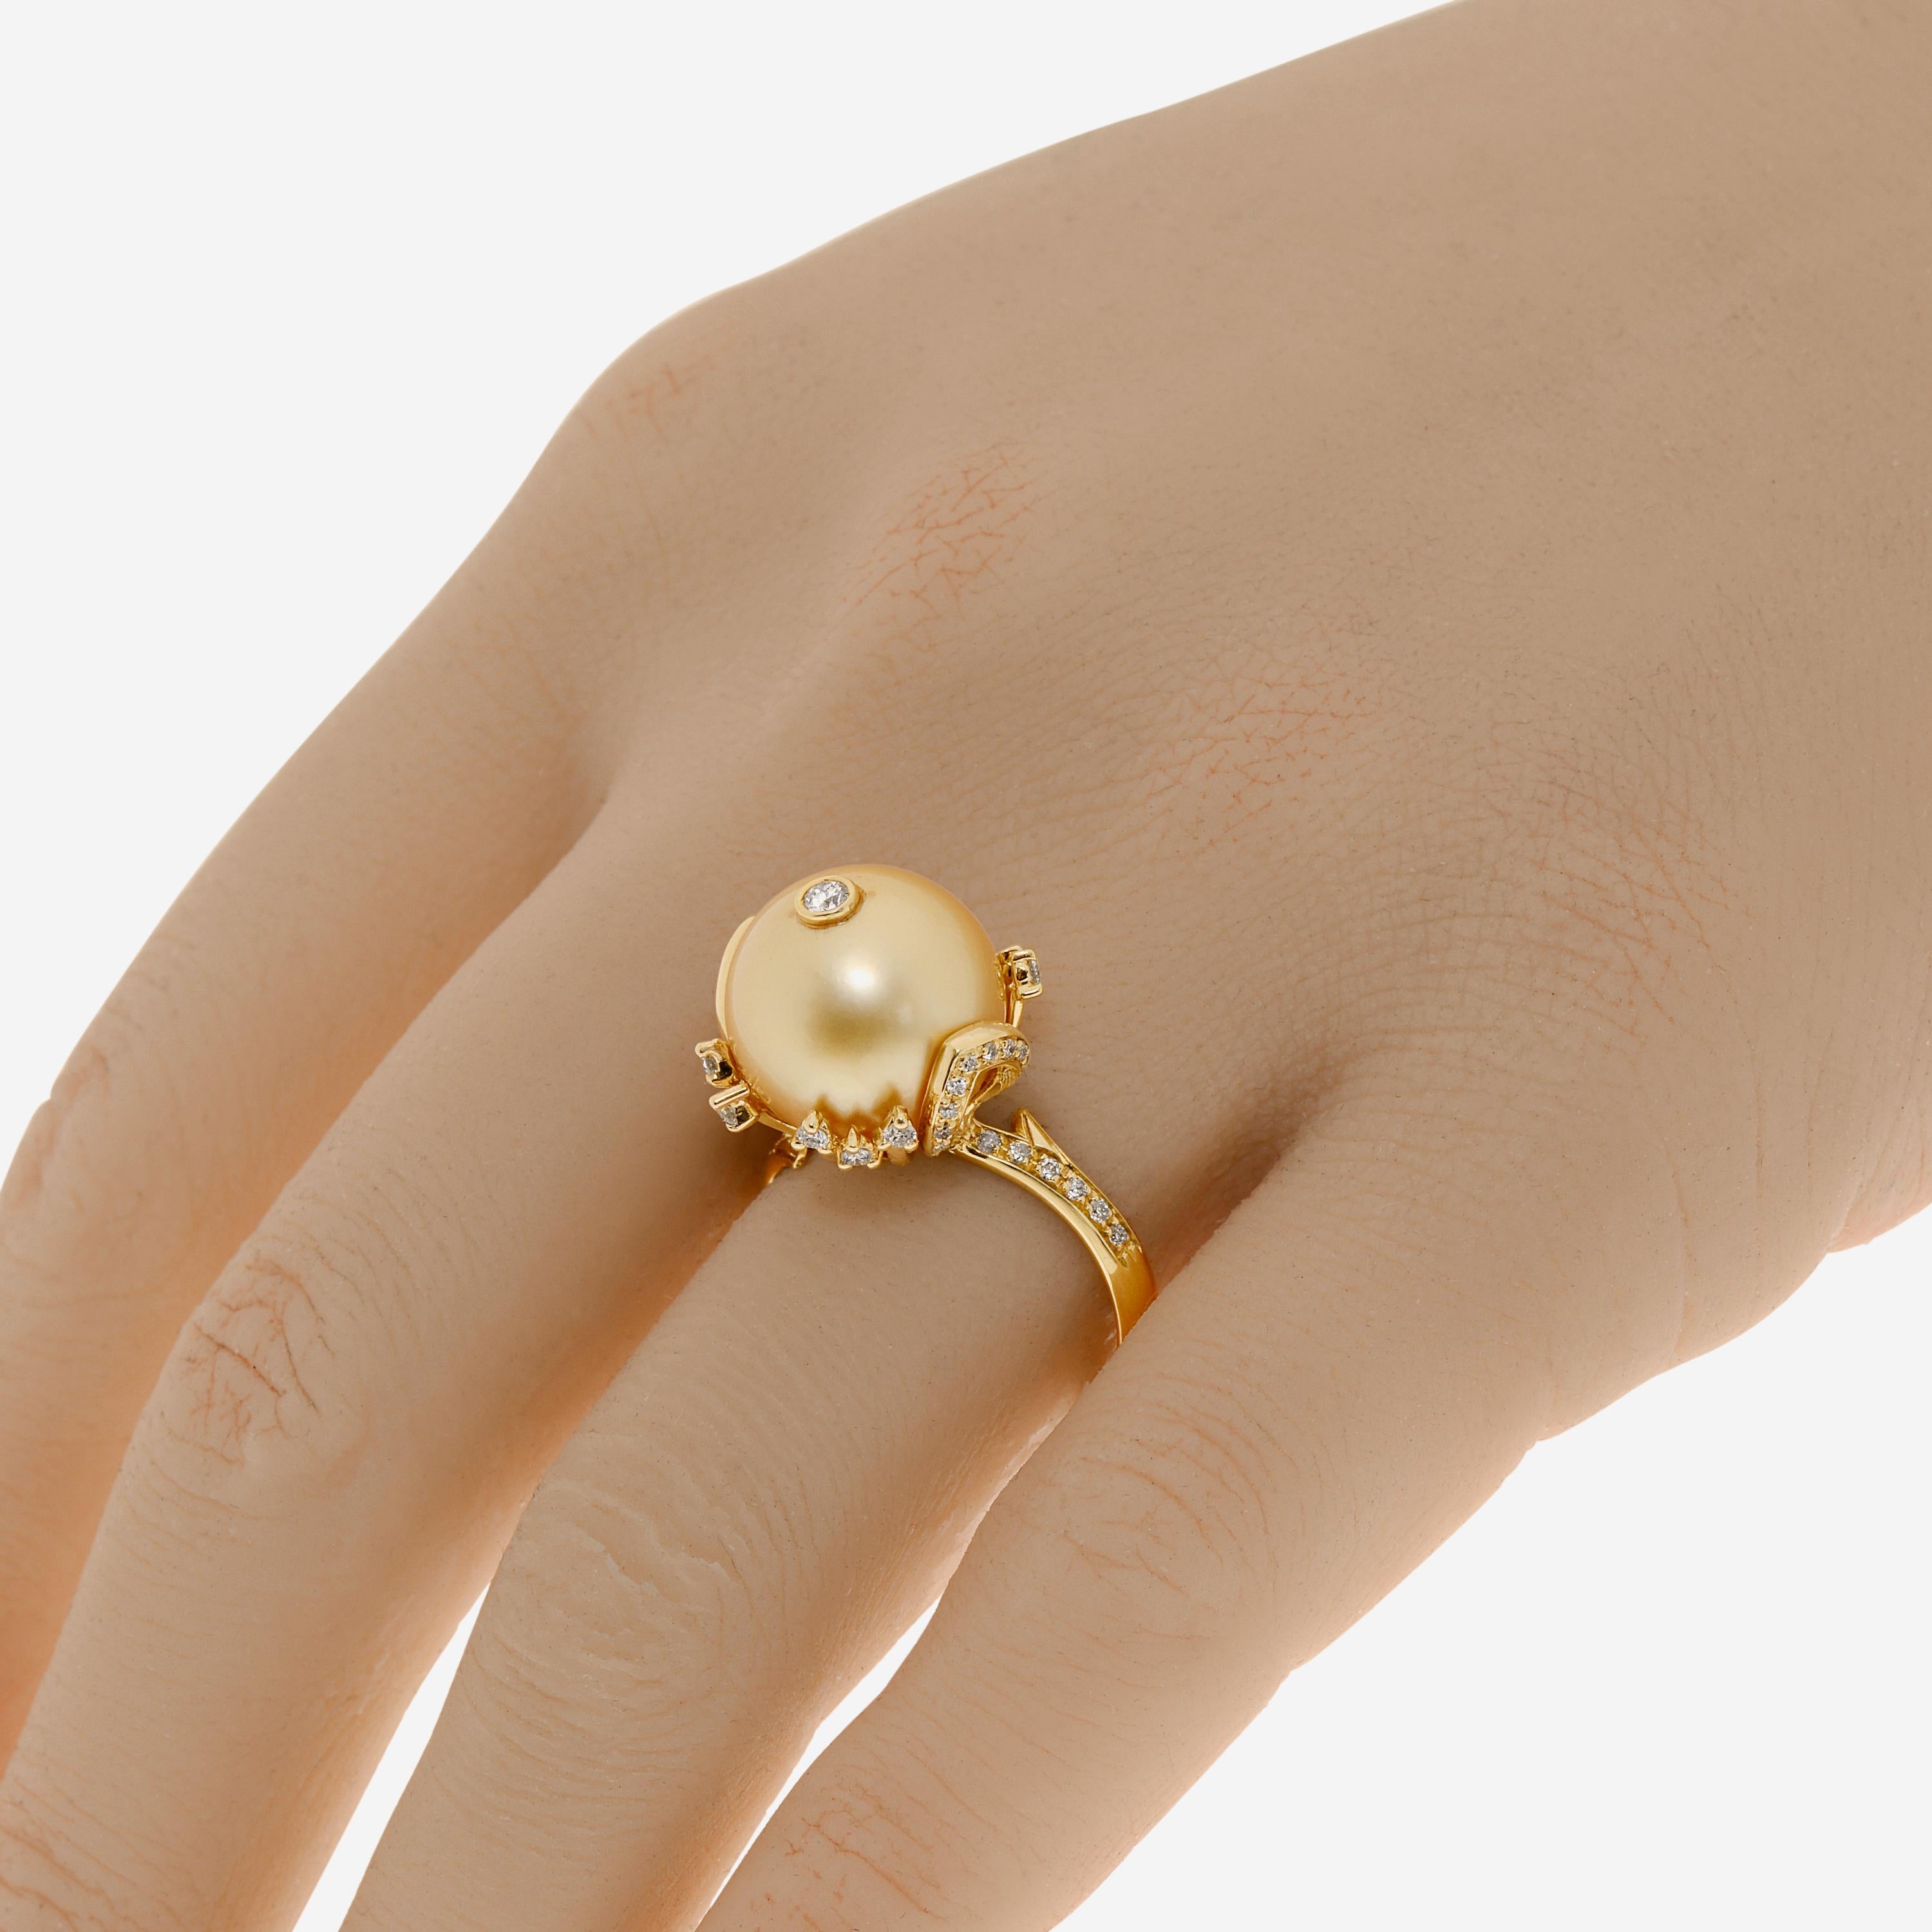 Zydo 18K yellow gold band ring features 0.35ct. tw. diamonds surrounding a 12mm pearl focal detail. The ring size is 7 (54.4). The decoration size is 5/8